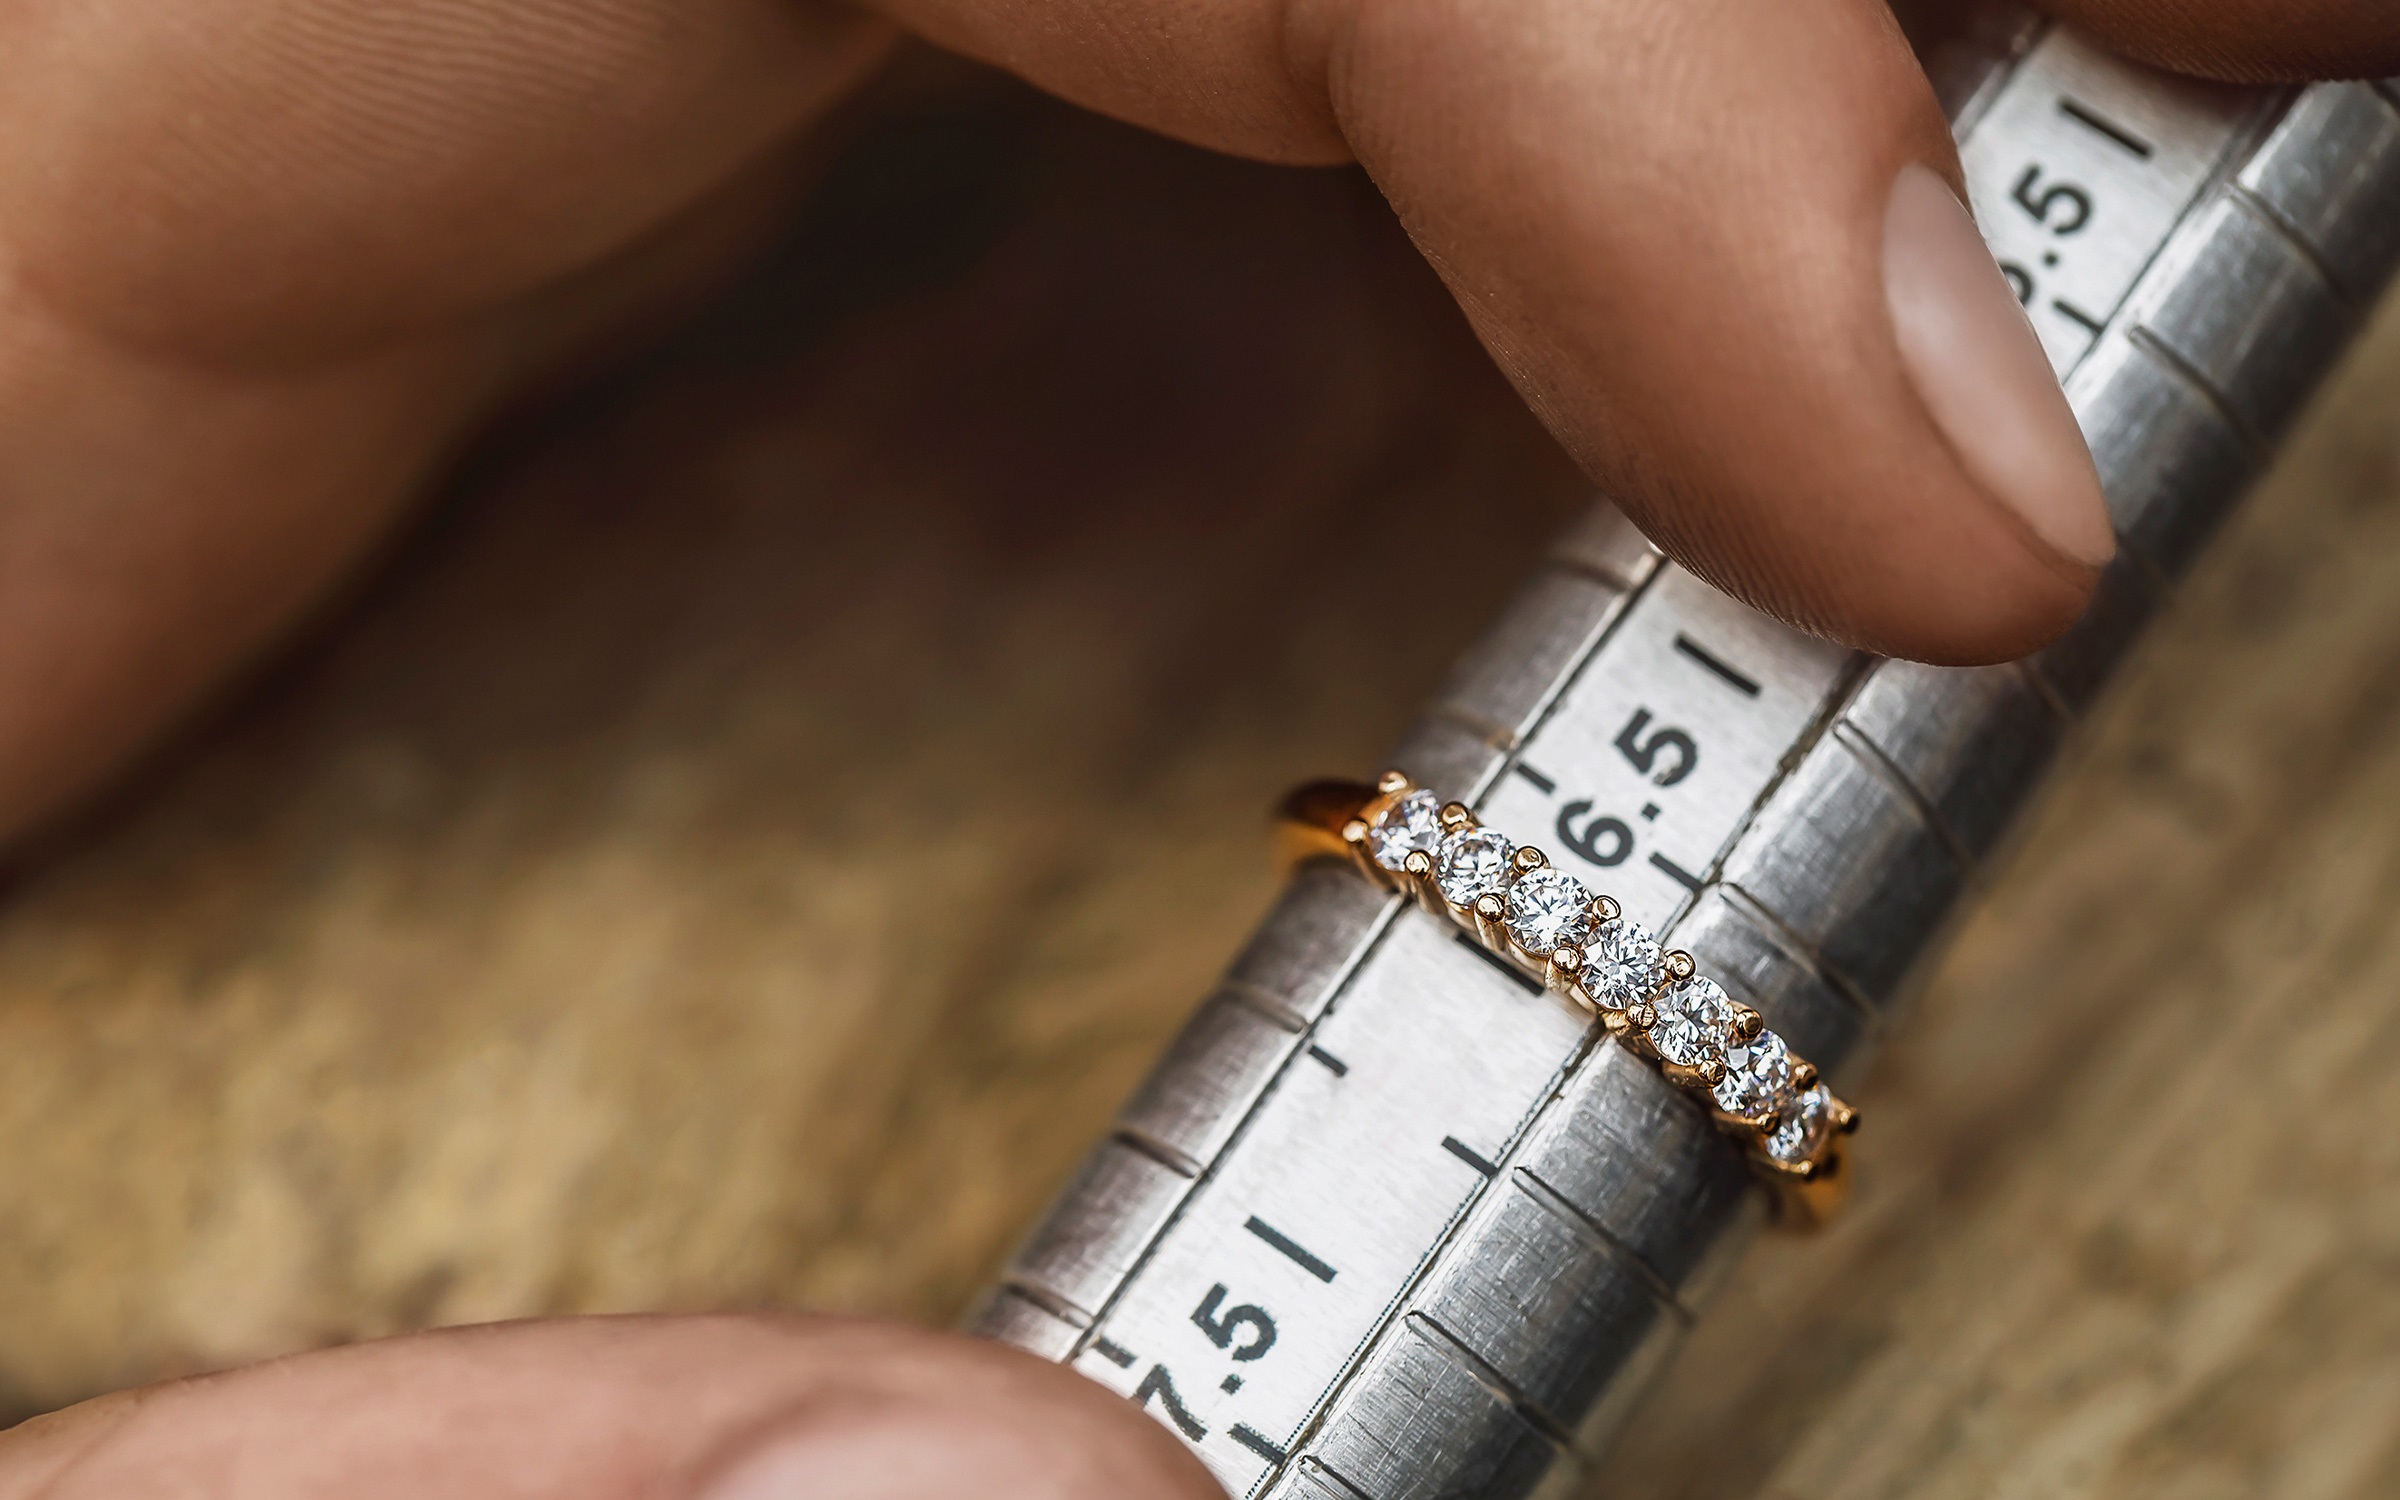 Jeweler using a ring sizer